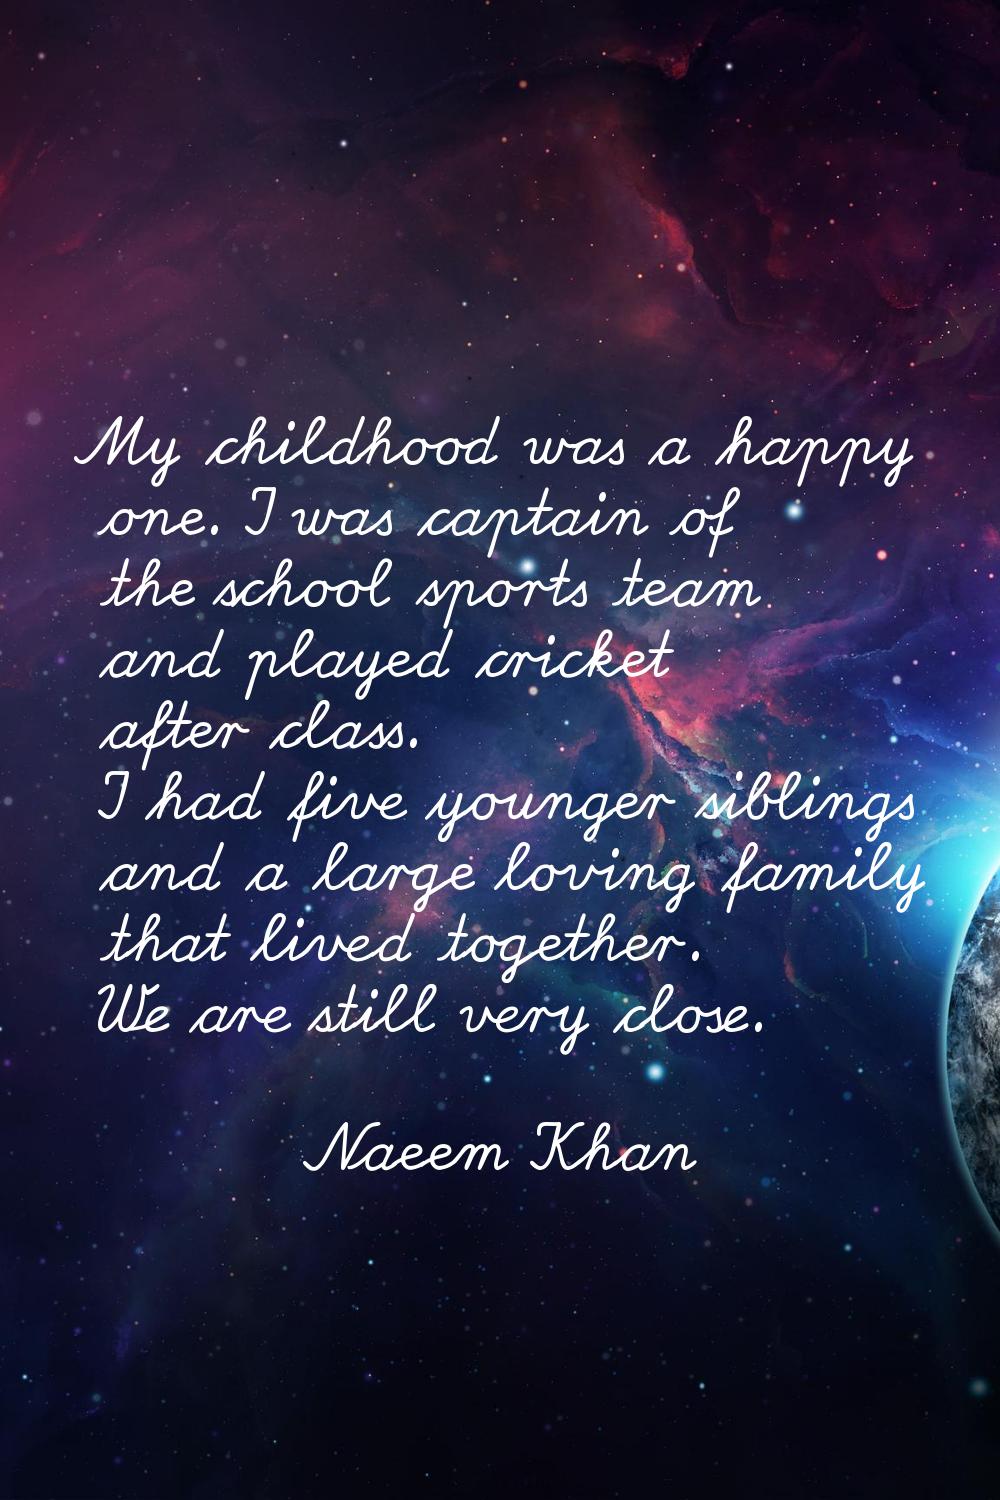 My childhood was a happy one. I was captain of the school sports team and played cricket after clas